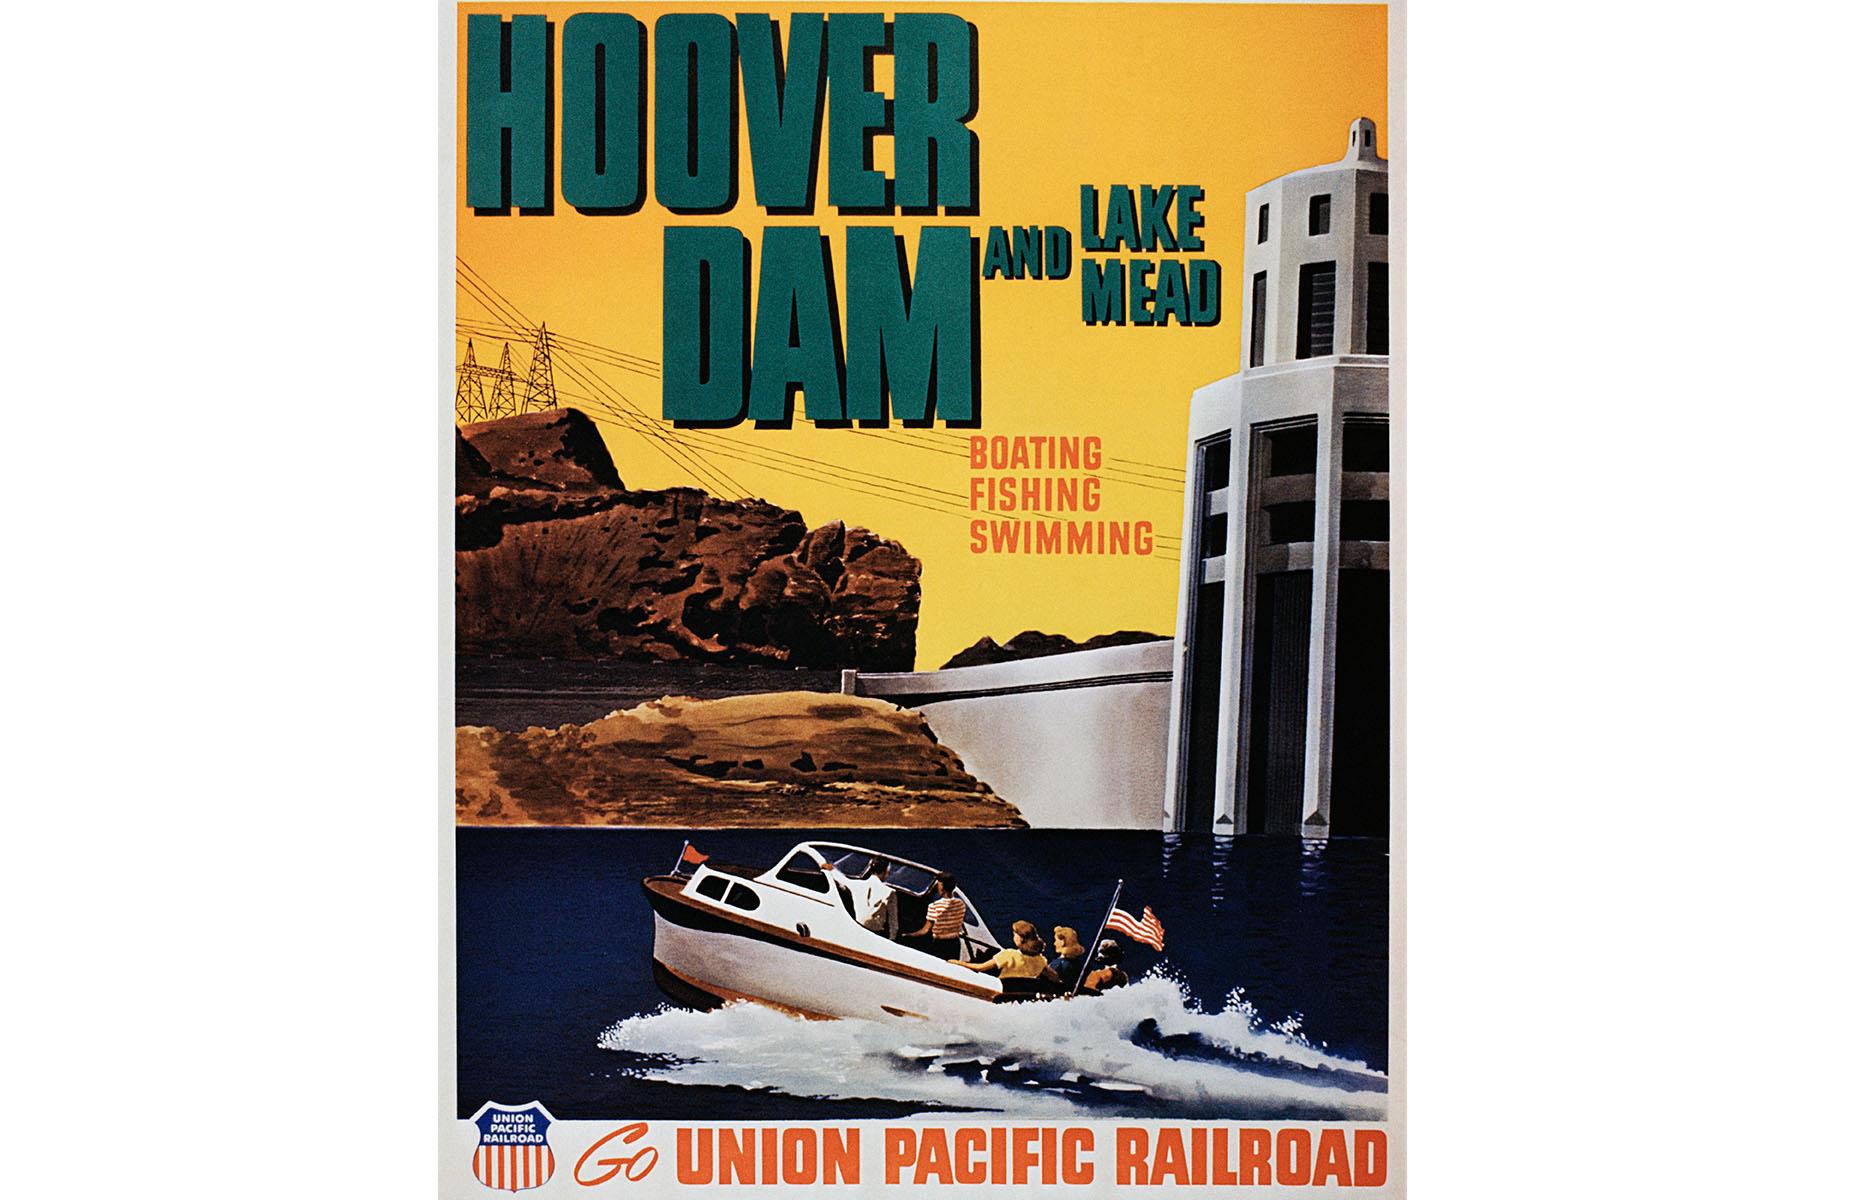 Nevada's imposing Hoover Dam was finished in the 1930s and its sheer scale and engineering ingenuity has wowed travelers ever since. Lake Mead is the dam's sprawling reservoir. Here the pair are advertised as a destination on the Union Pacific Railroad – the possibility of swimming, boating and fishing in stunning Lake Mead is used to entice travelers.